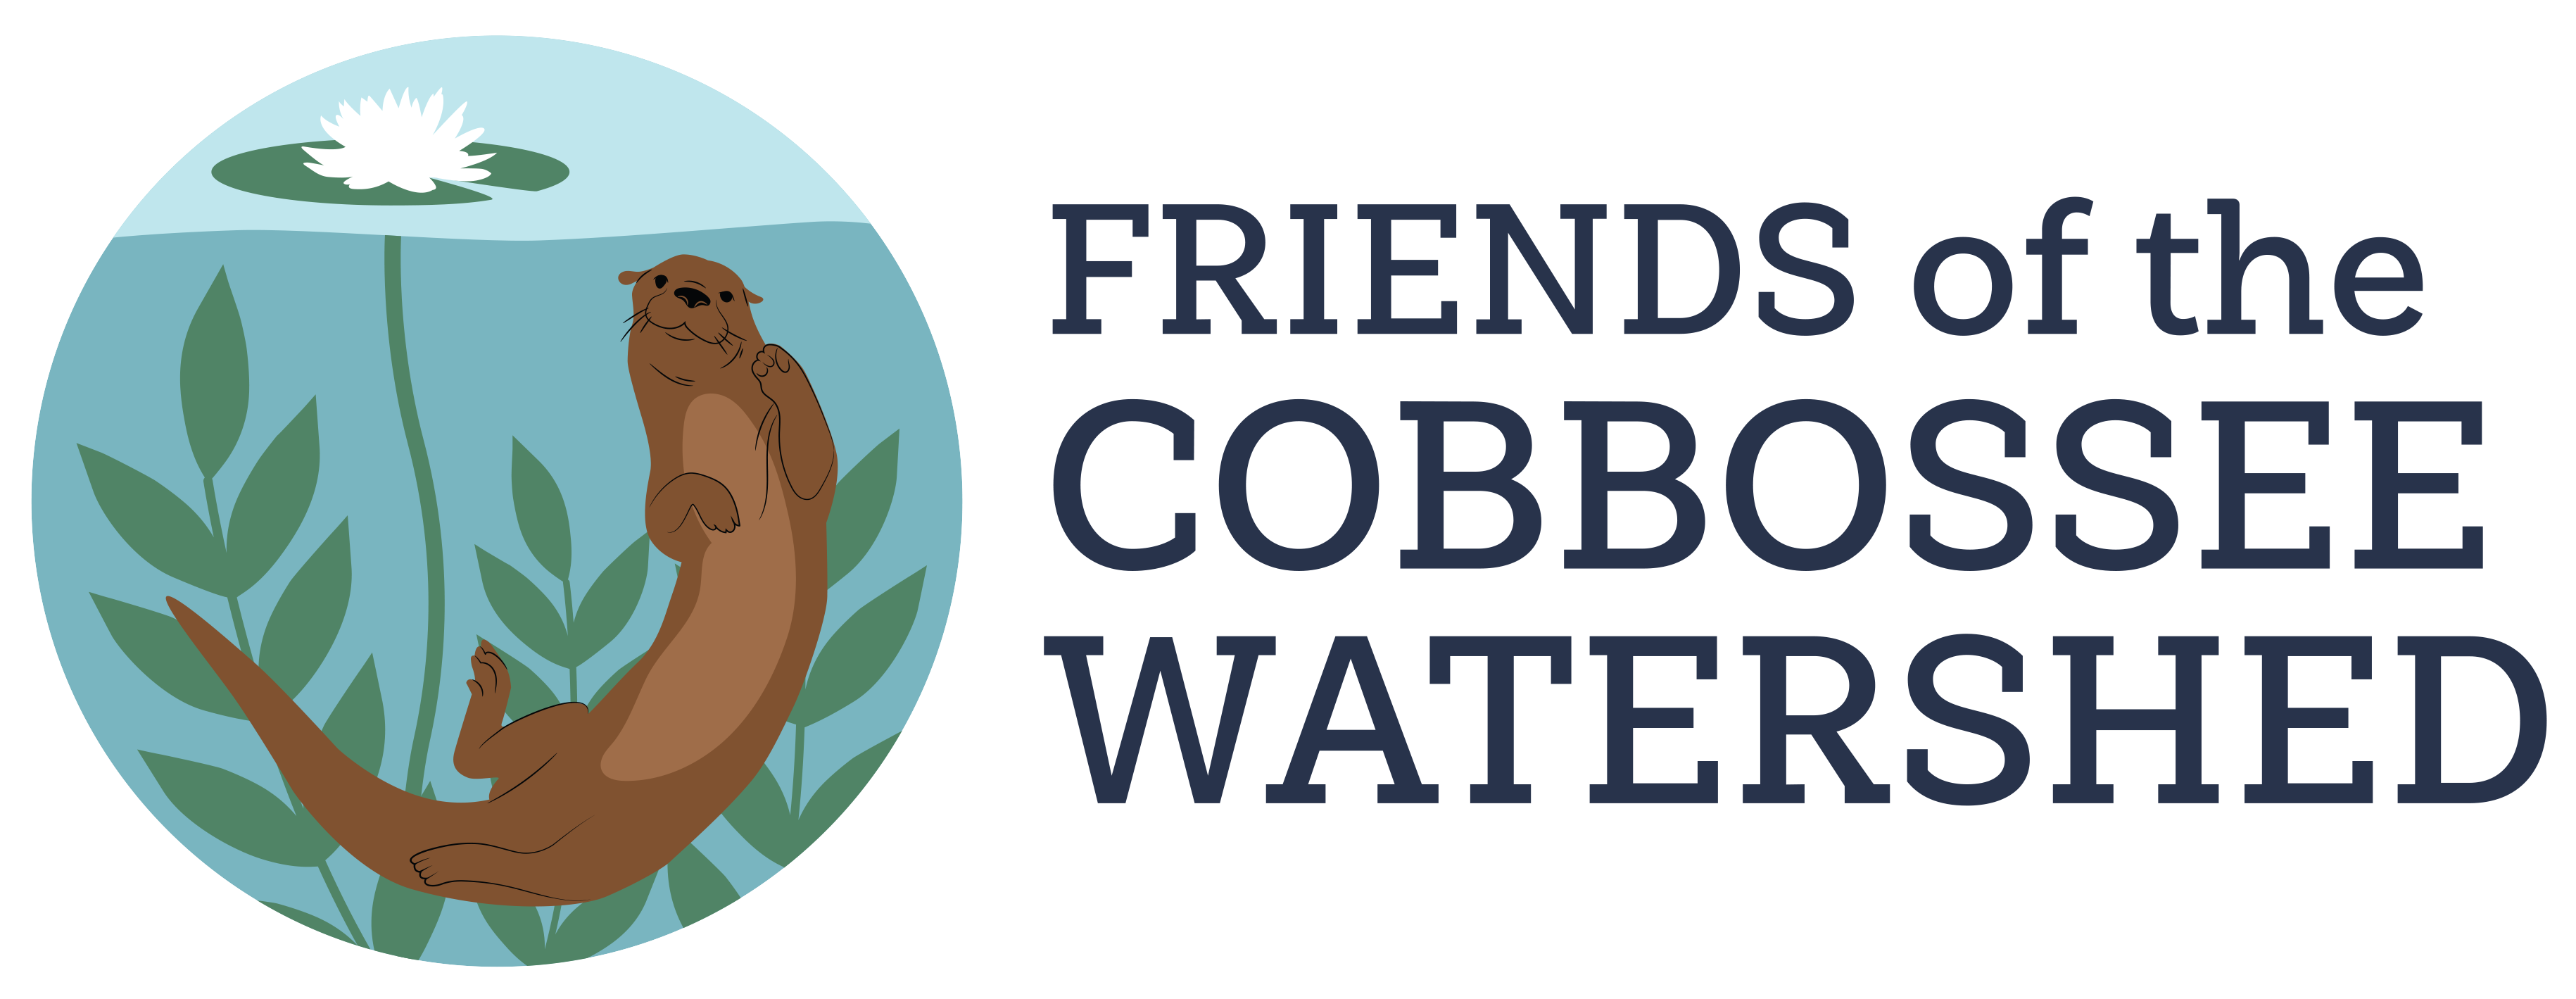 Friends of the Cobbossee Watershed